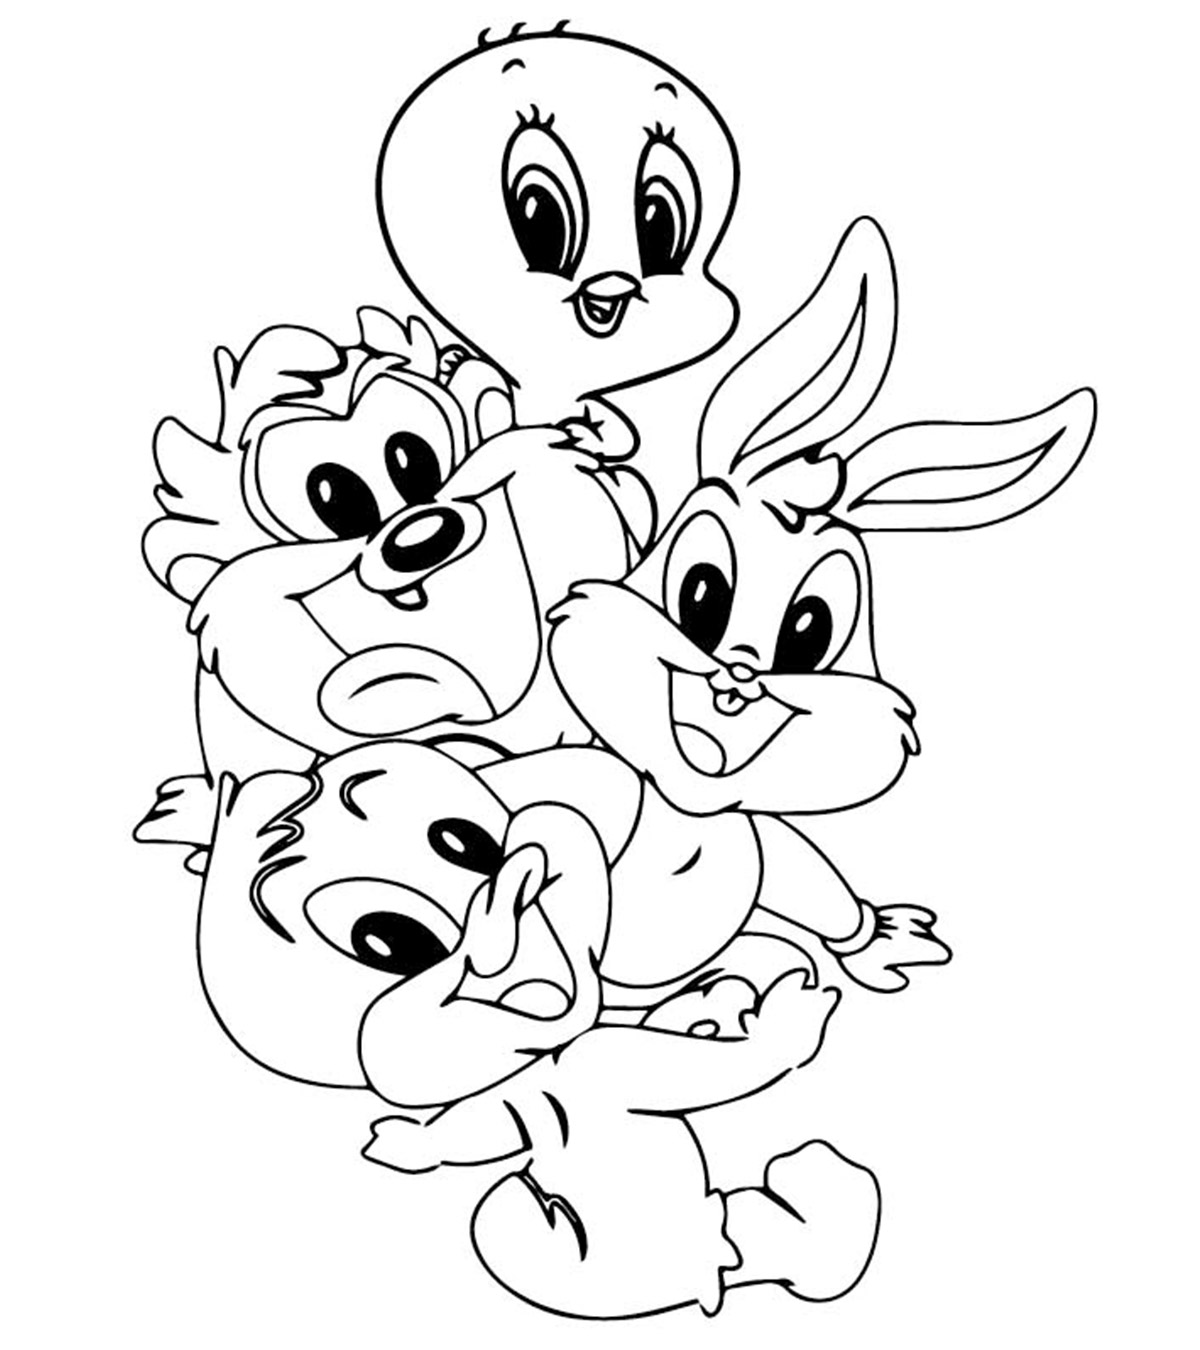 10 Lovely Tweety Bird Coloring Pages your Toddler Will Love